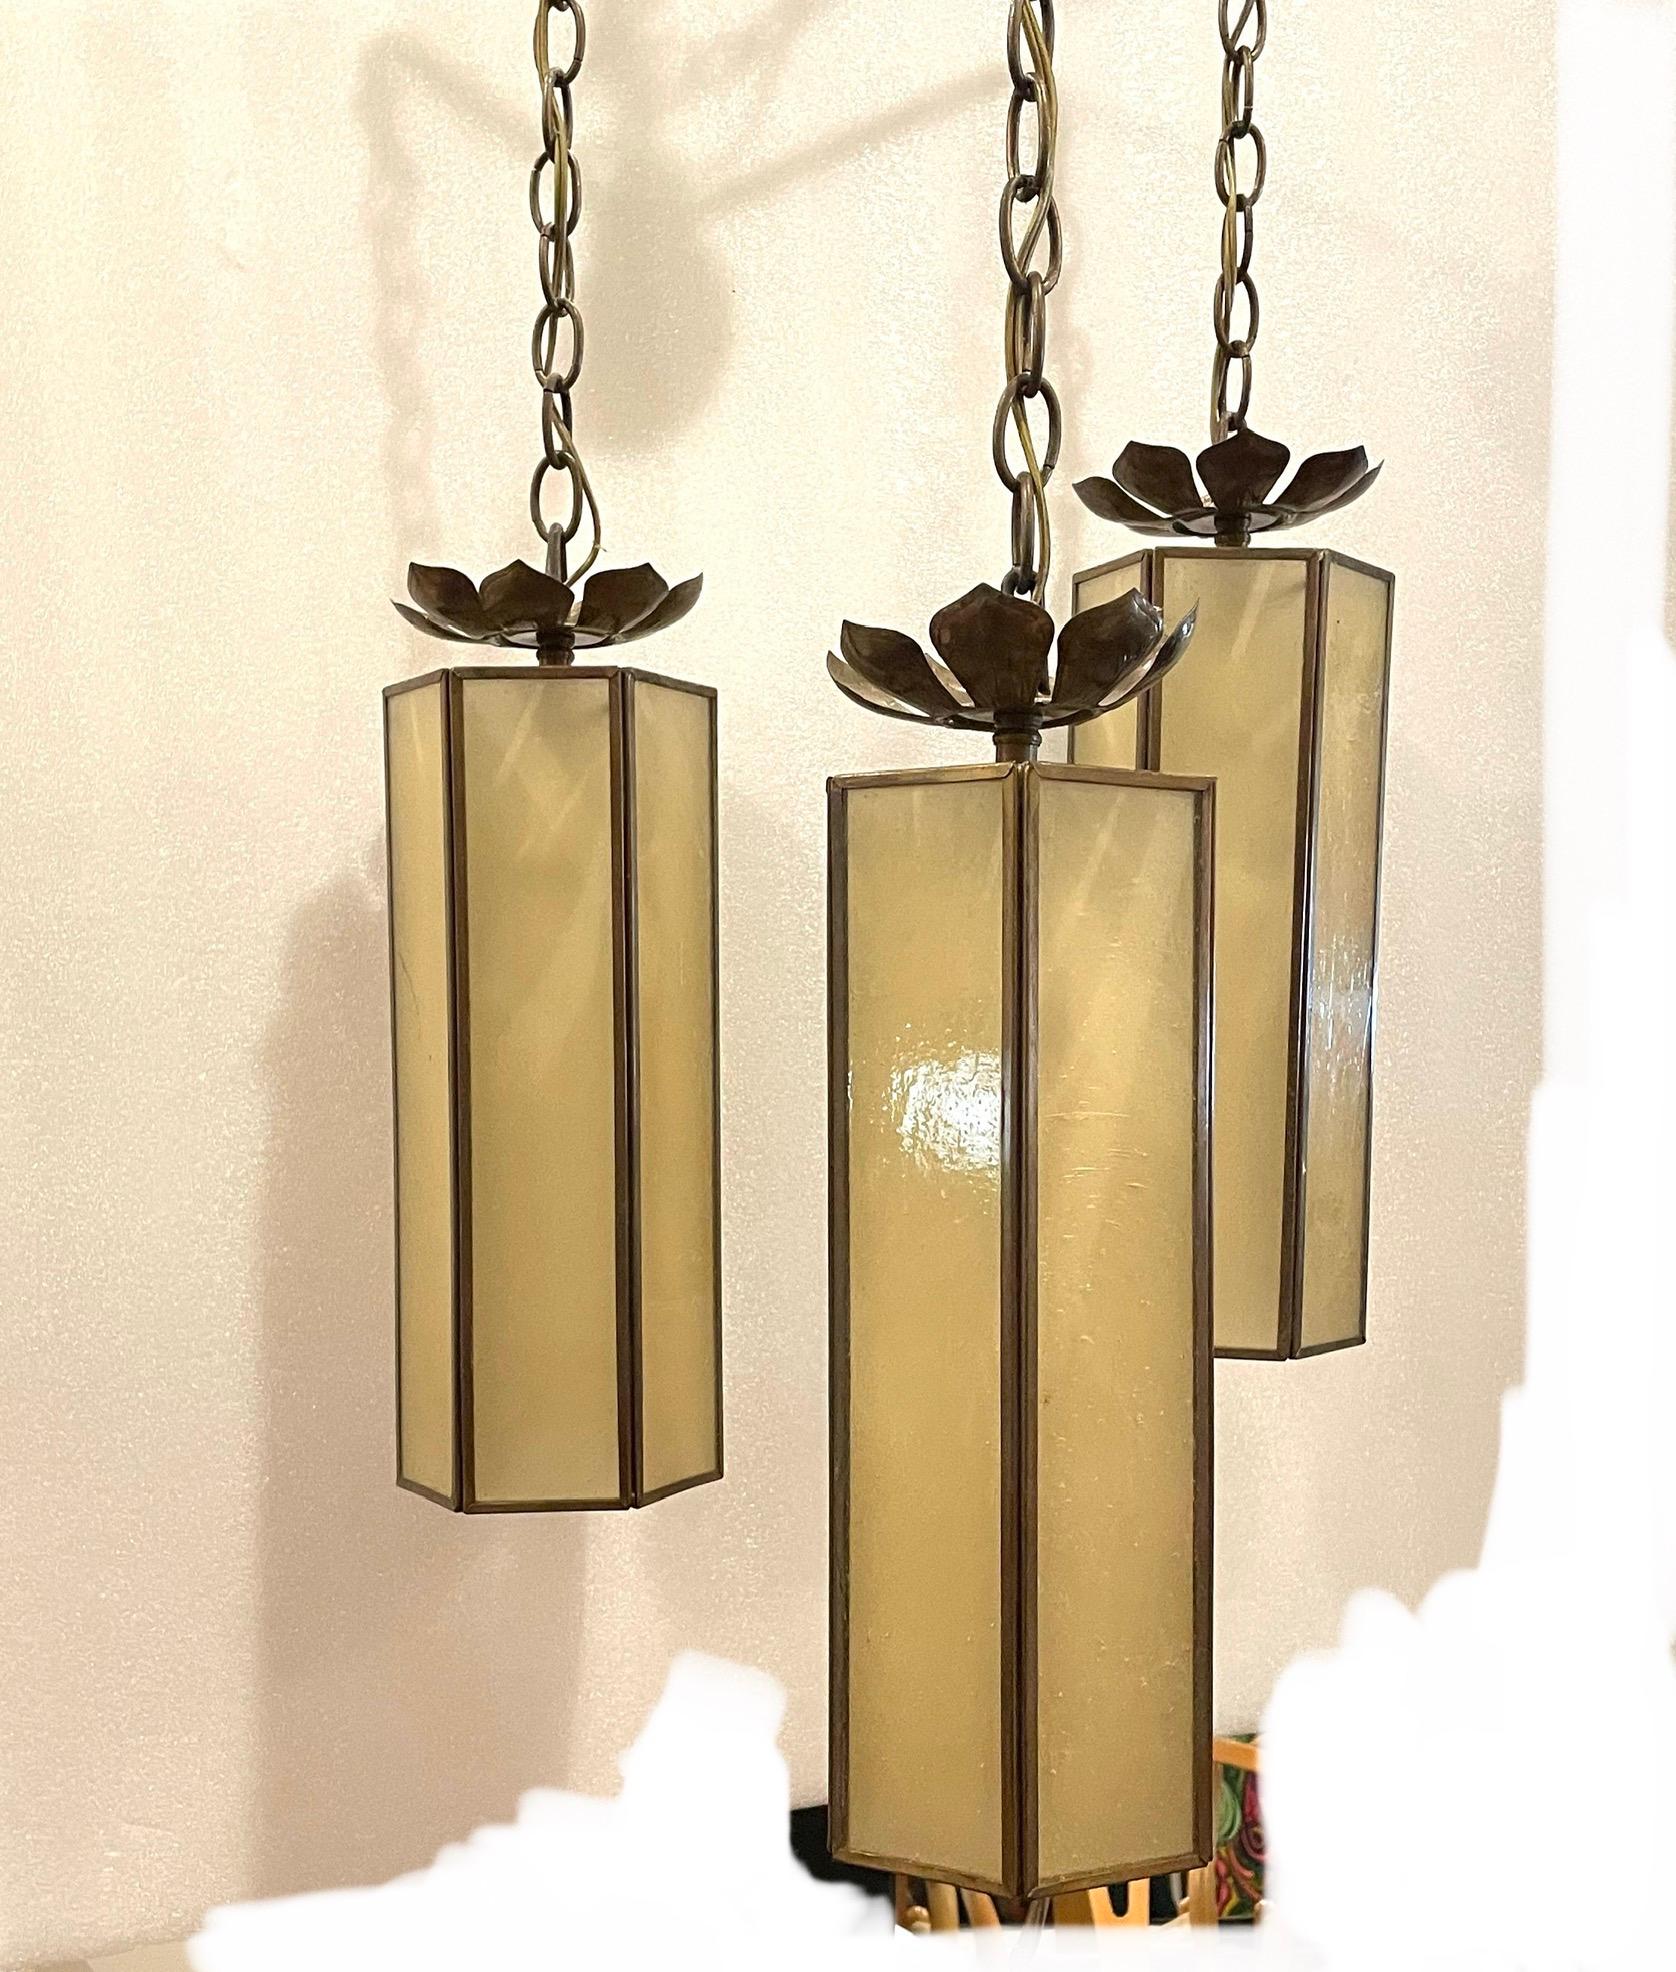 Beautiful decorative 3 tear chandelier freshly rewired patinated brass and glass.